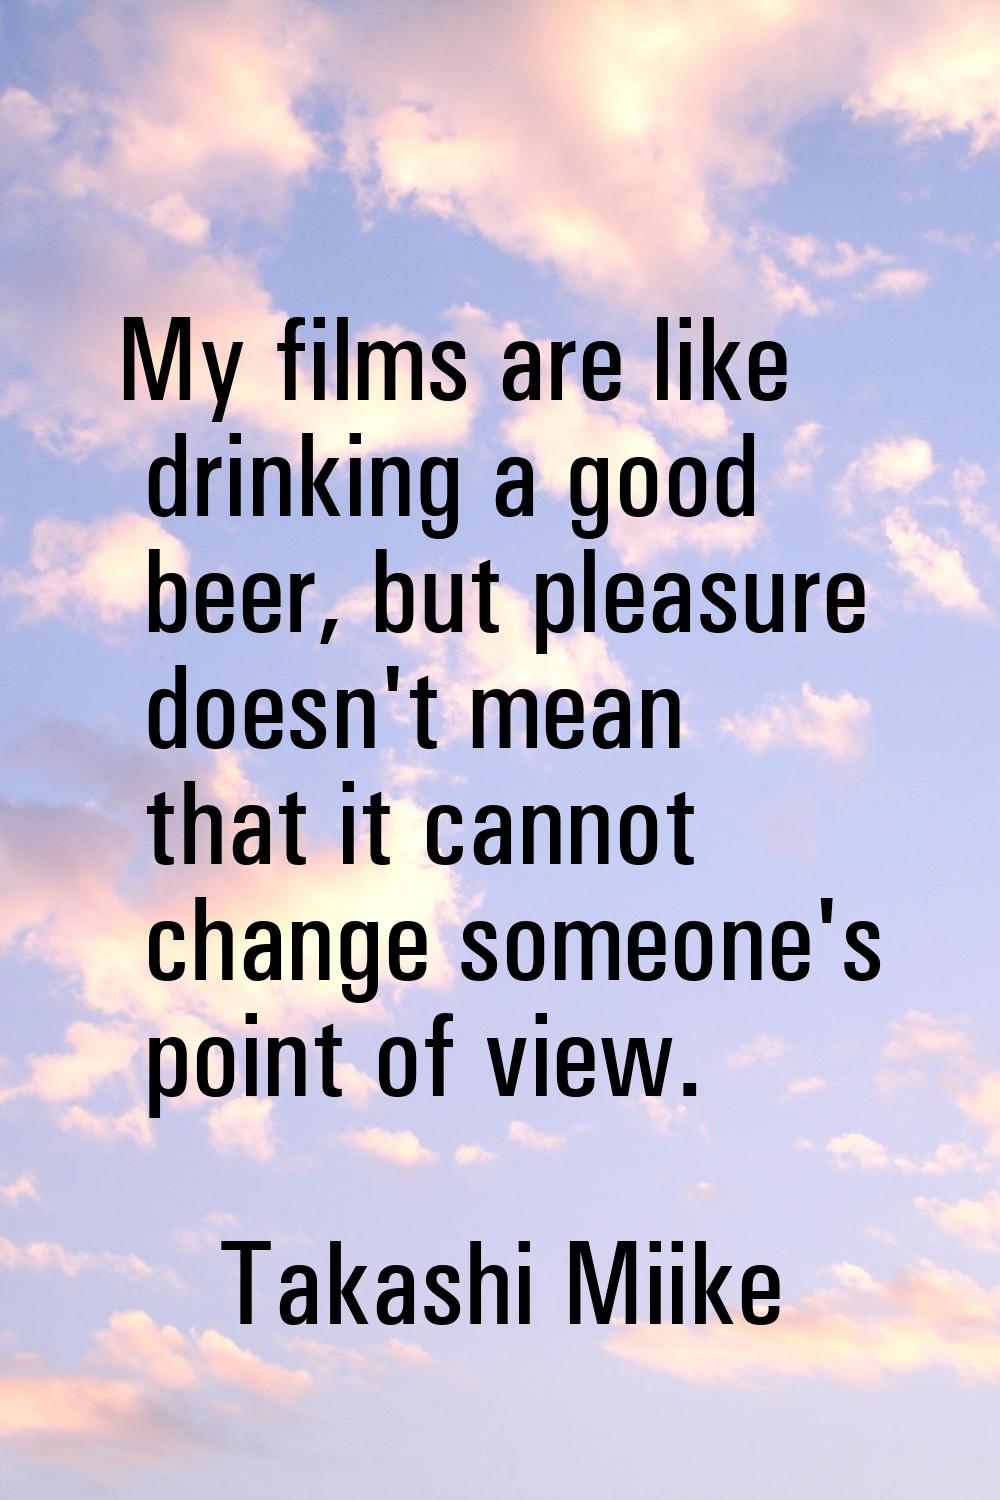 My films are like drinking a good beer, but pleasure doesn't mean that it cannot change someone's p